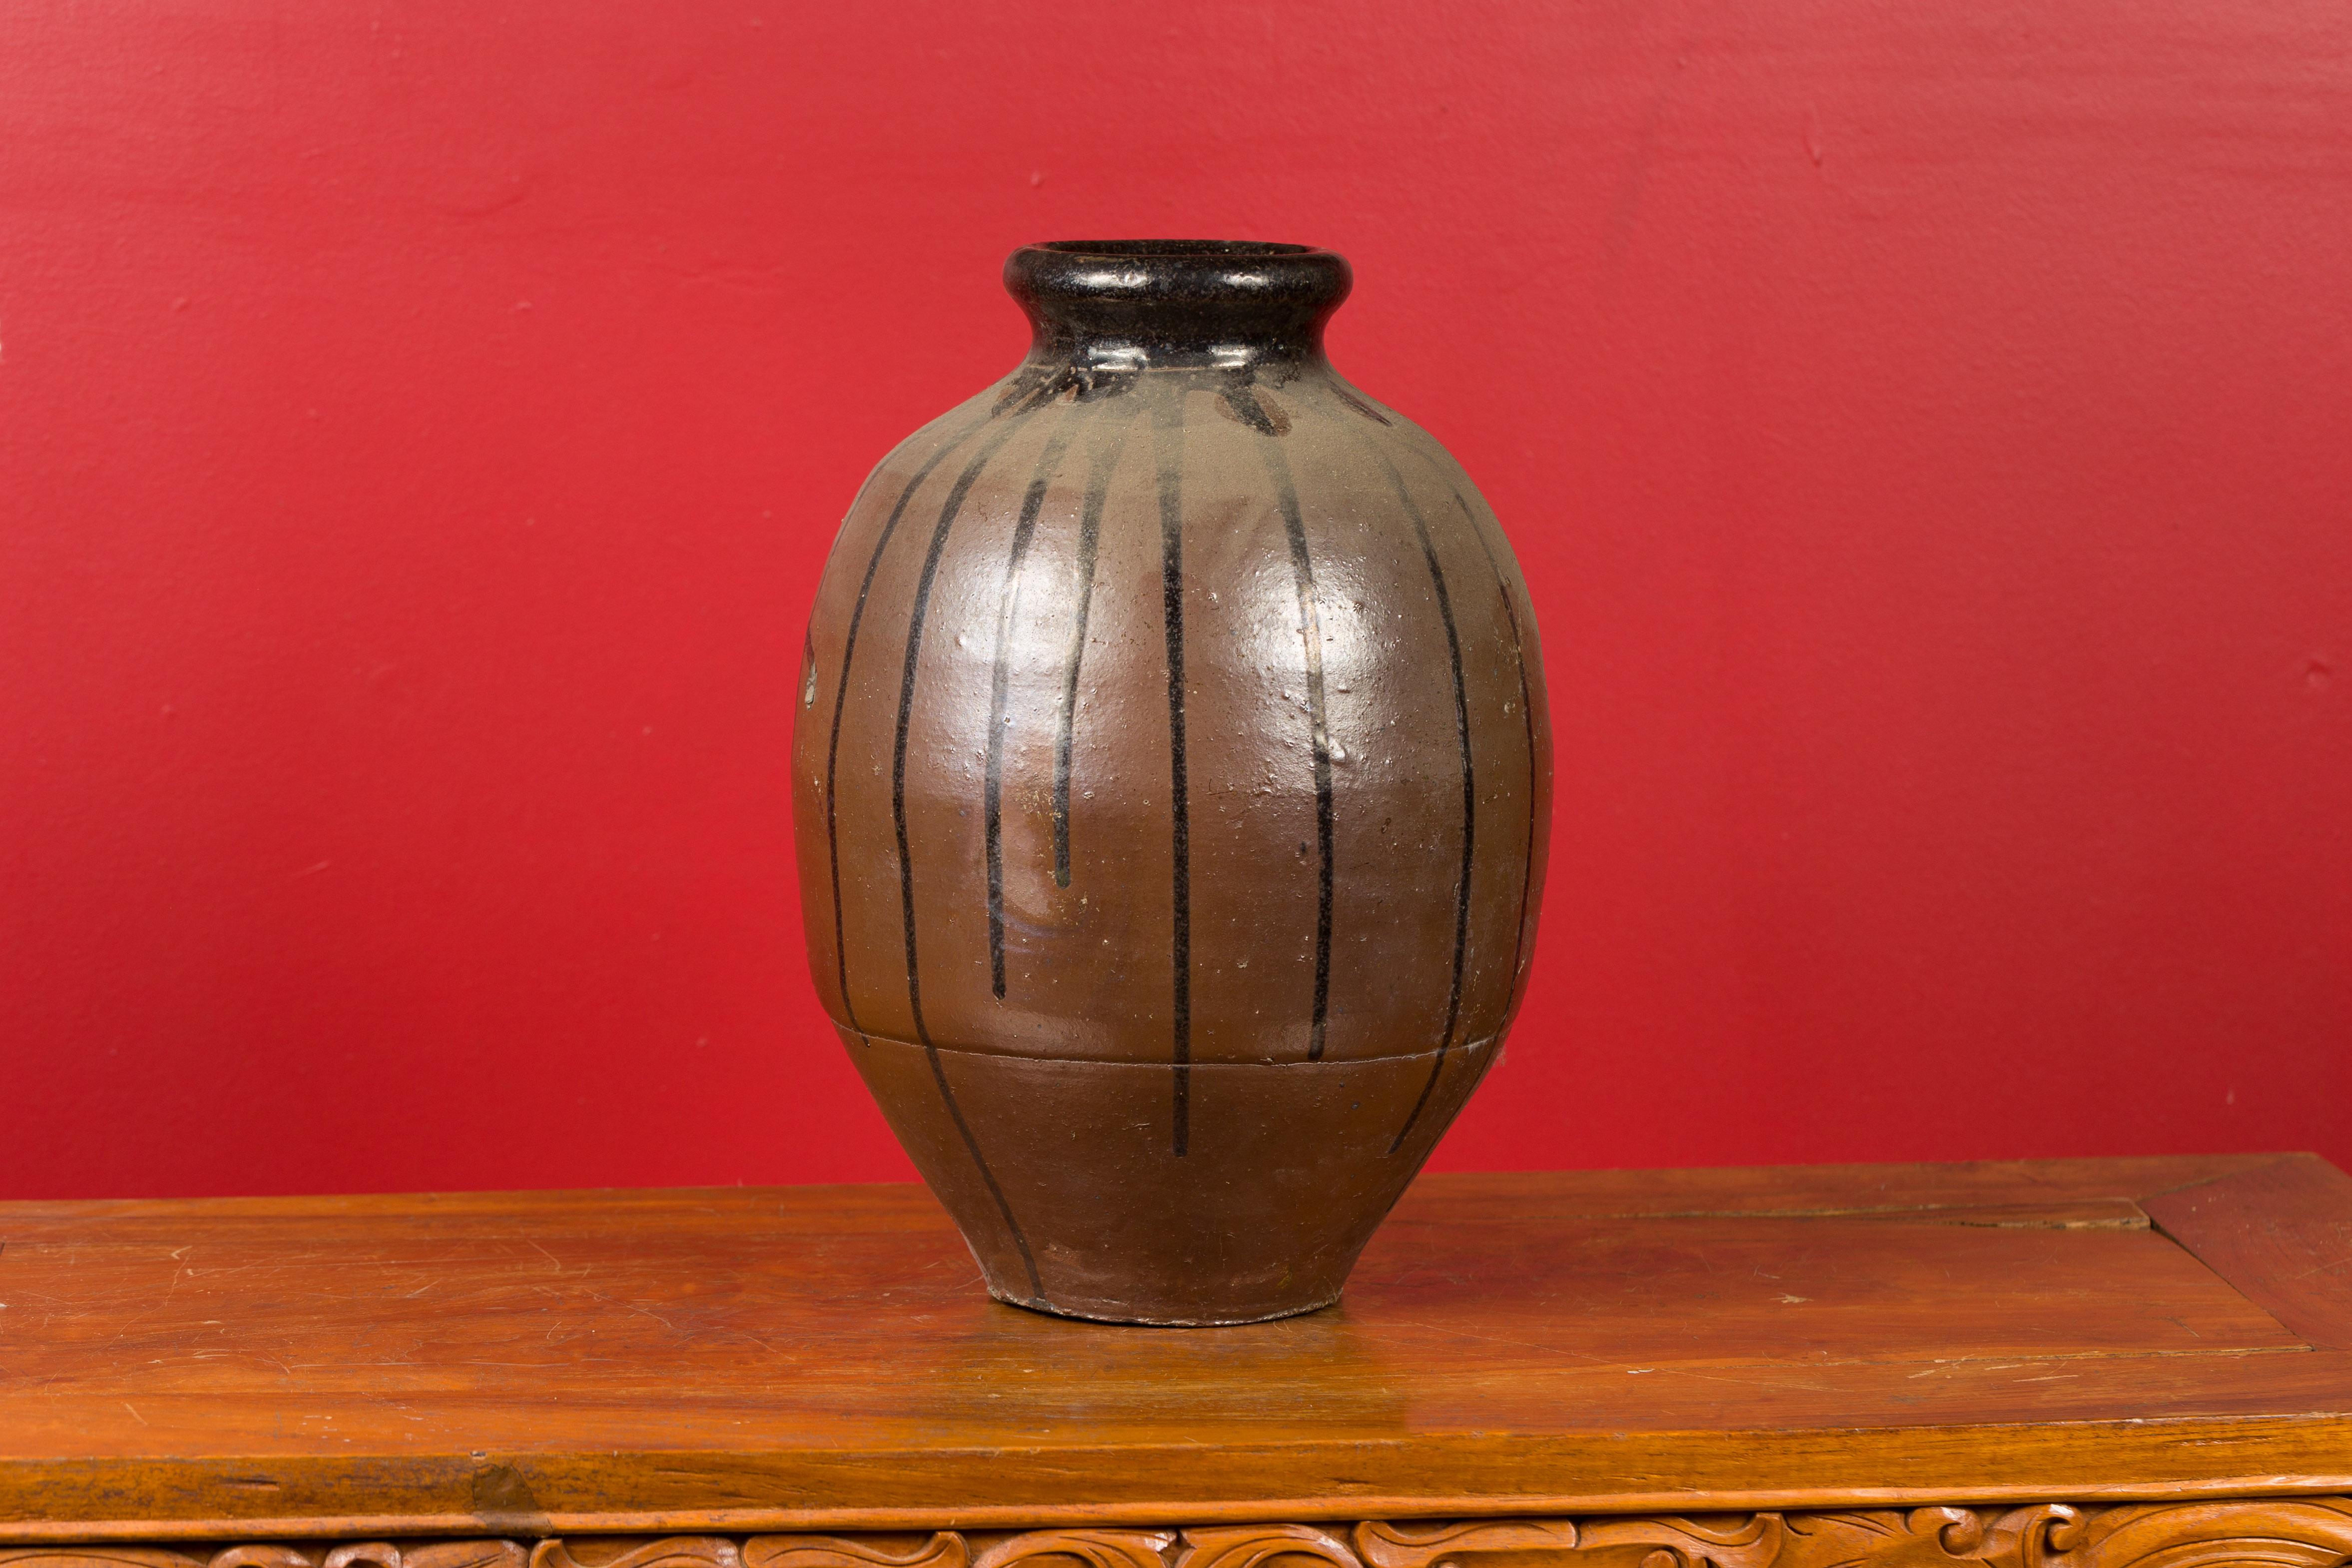 A Japanese Meiji period brown vase from the 19th century with black glazed accents. Created in Japan during the Meiji dynasty, this vase attracts our attention with its brown patina, delicately accented with black drippings. Topped with a rounded